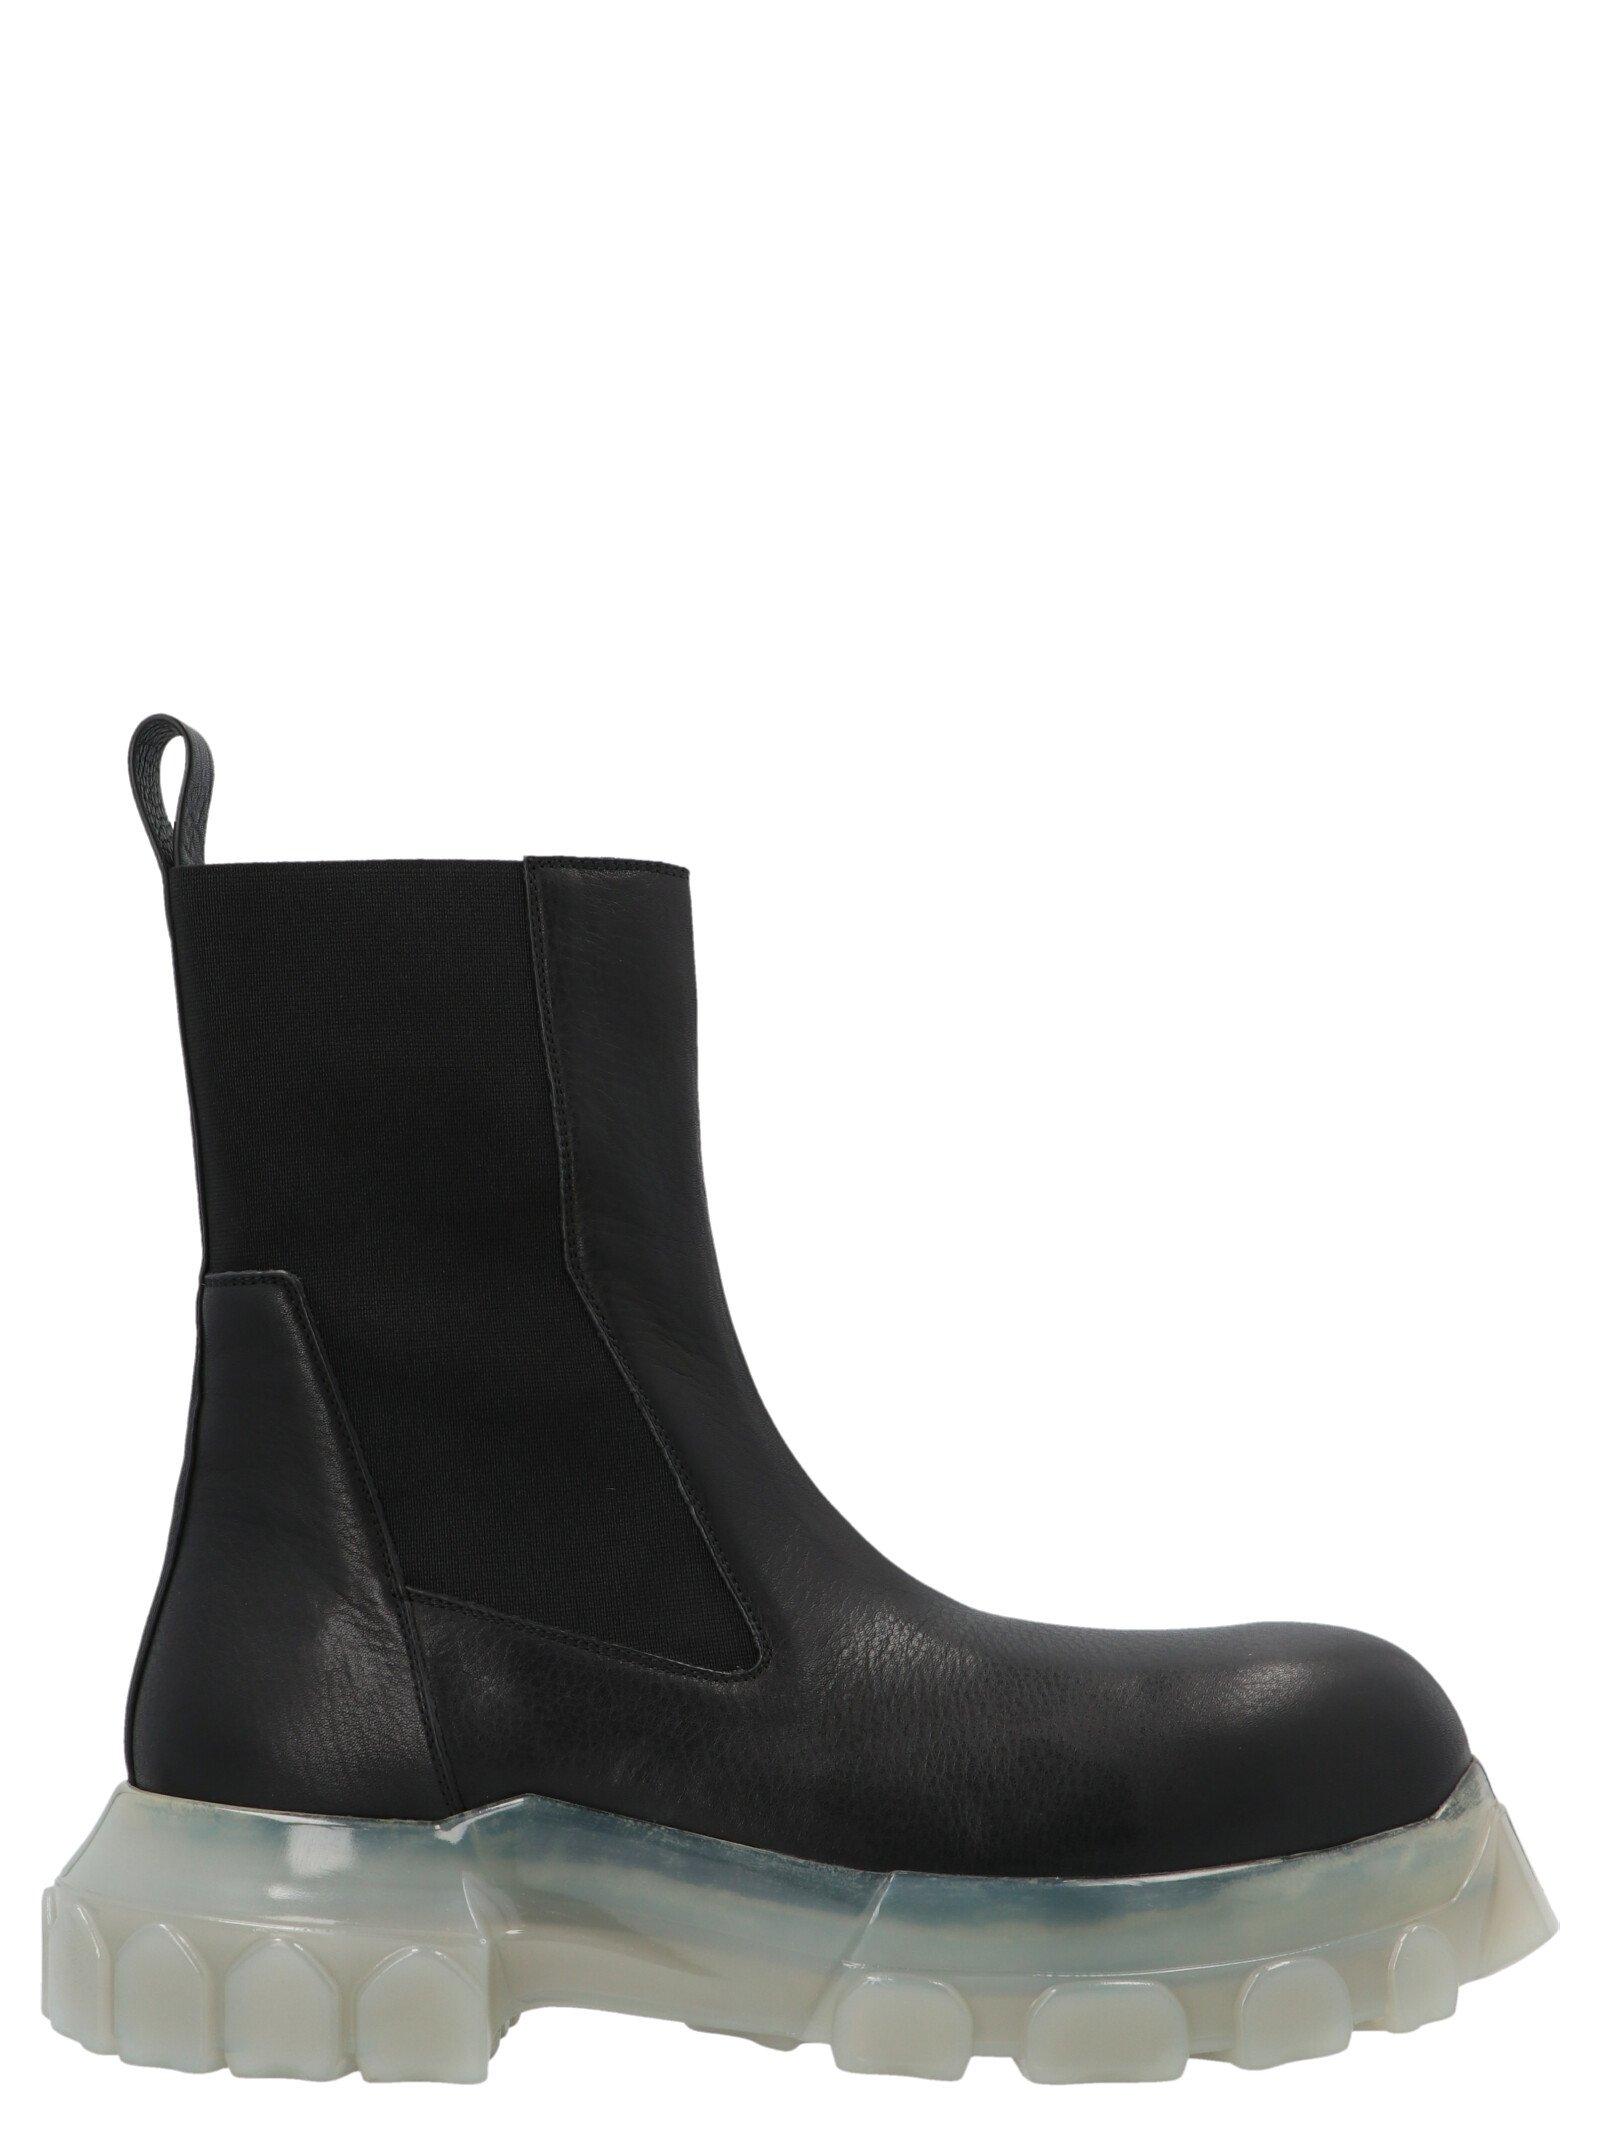 Rick Owens Leather Phlegethon Beatle Bozo Tractor Boots in Black 